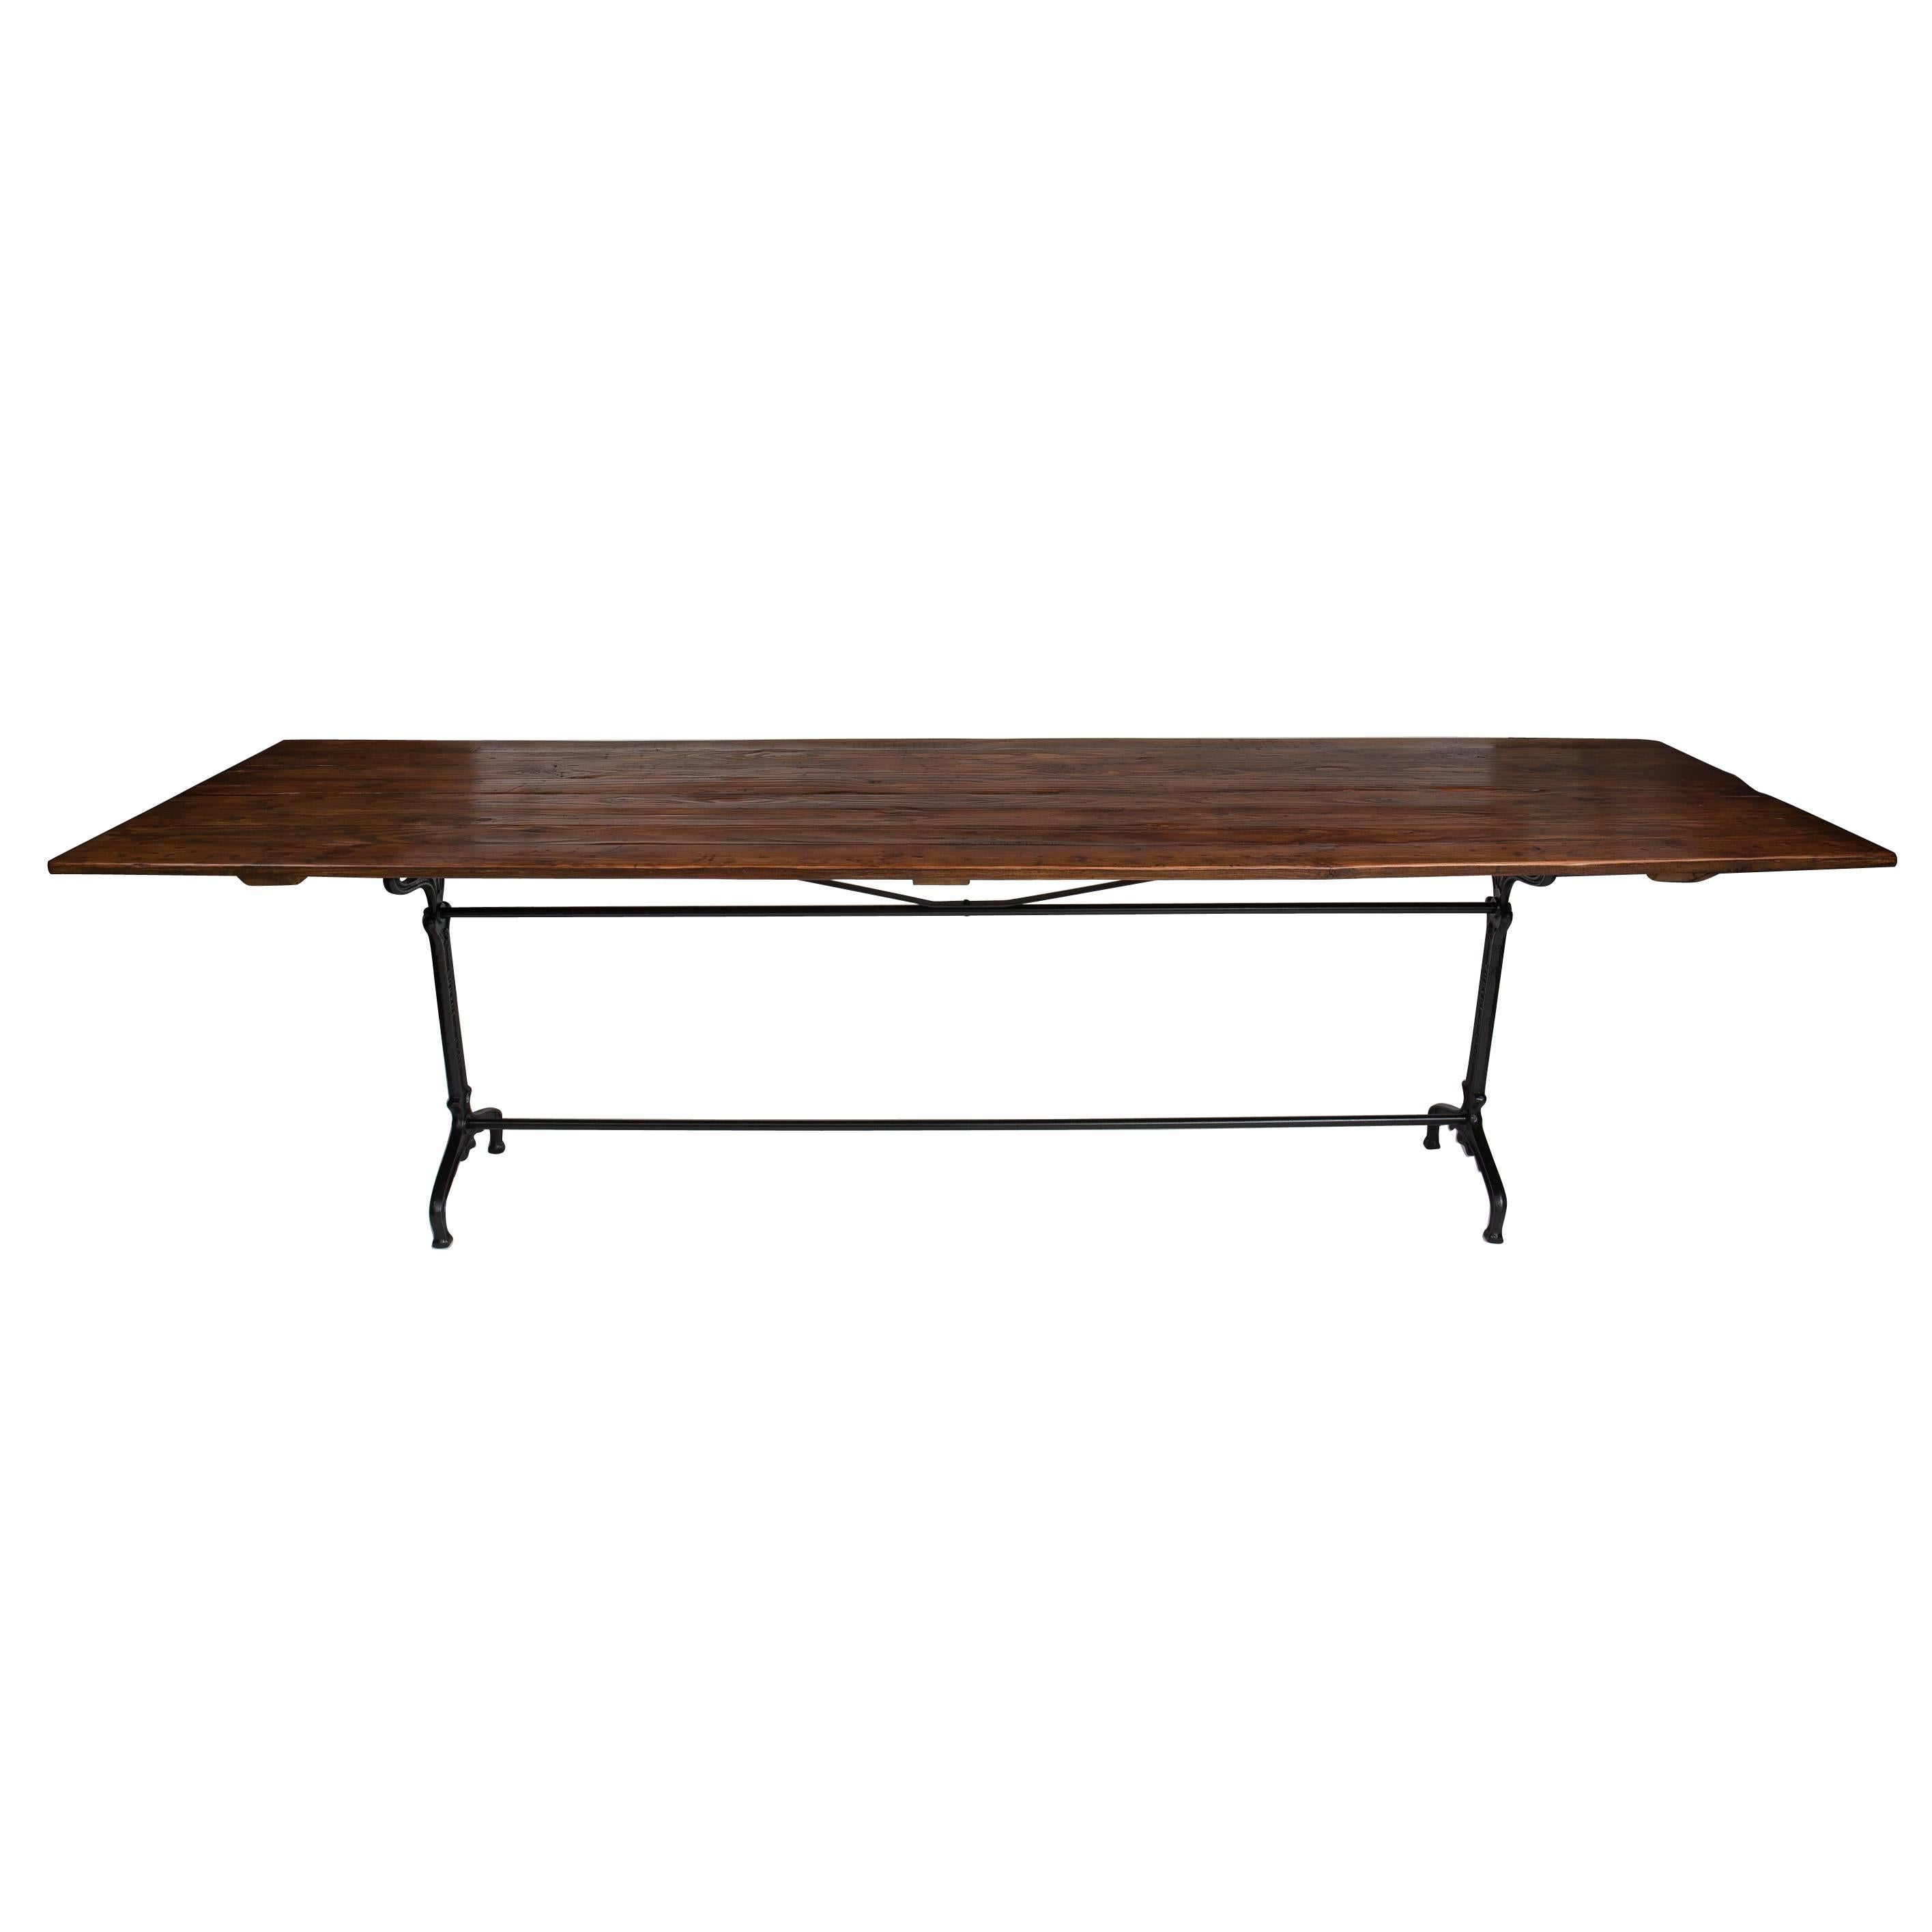 French Antique Banquet Table from Beaujolais Region